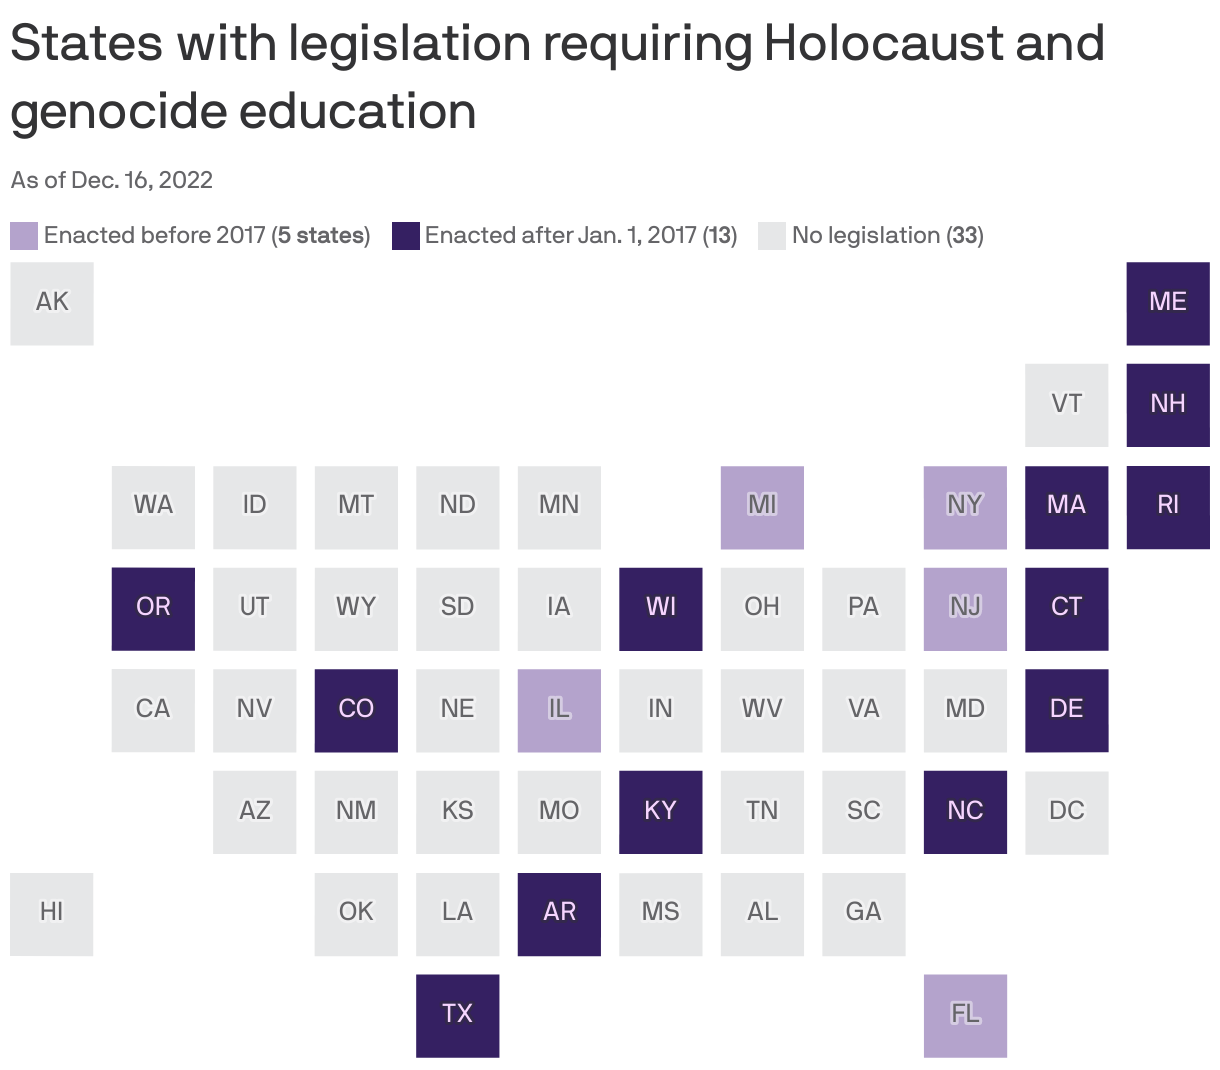 States with legislation requiring Holocaust and genocide education